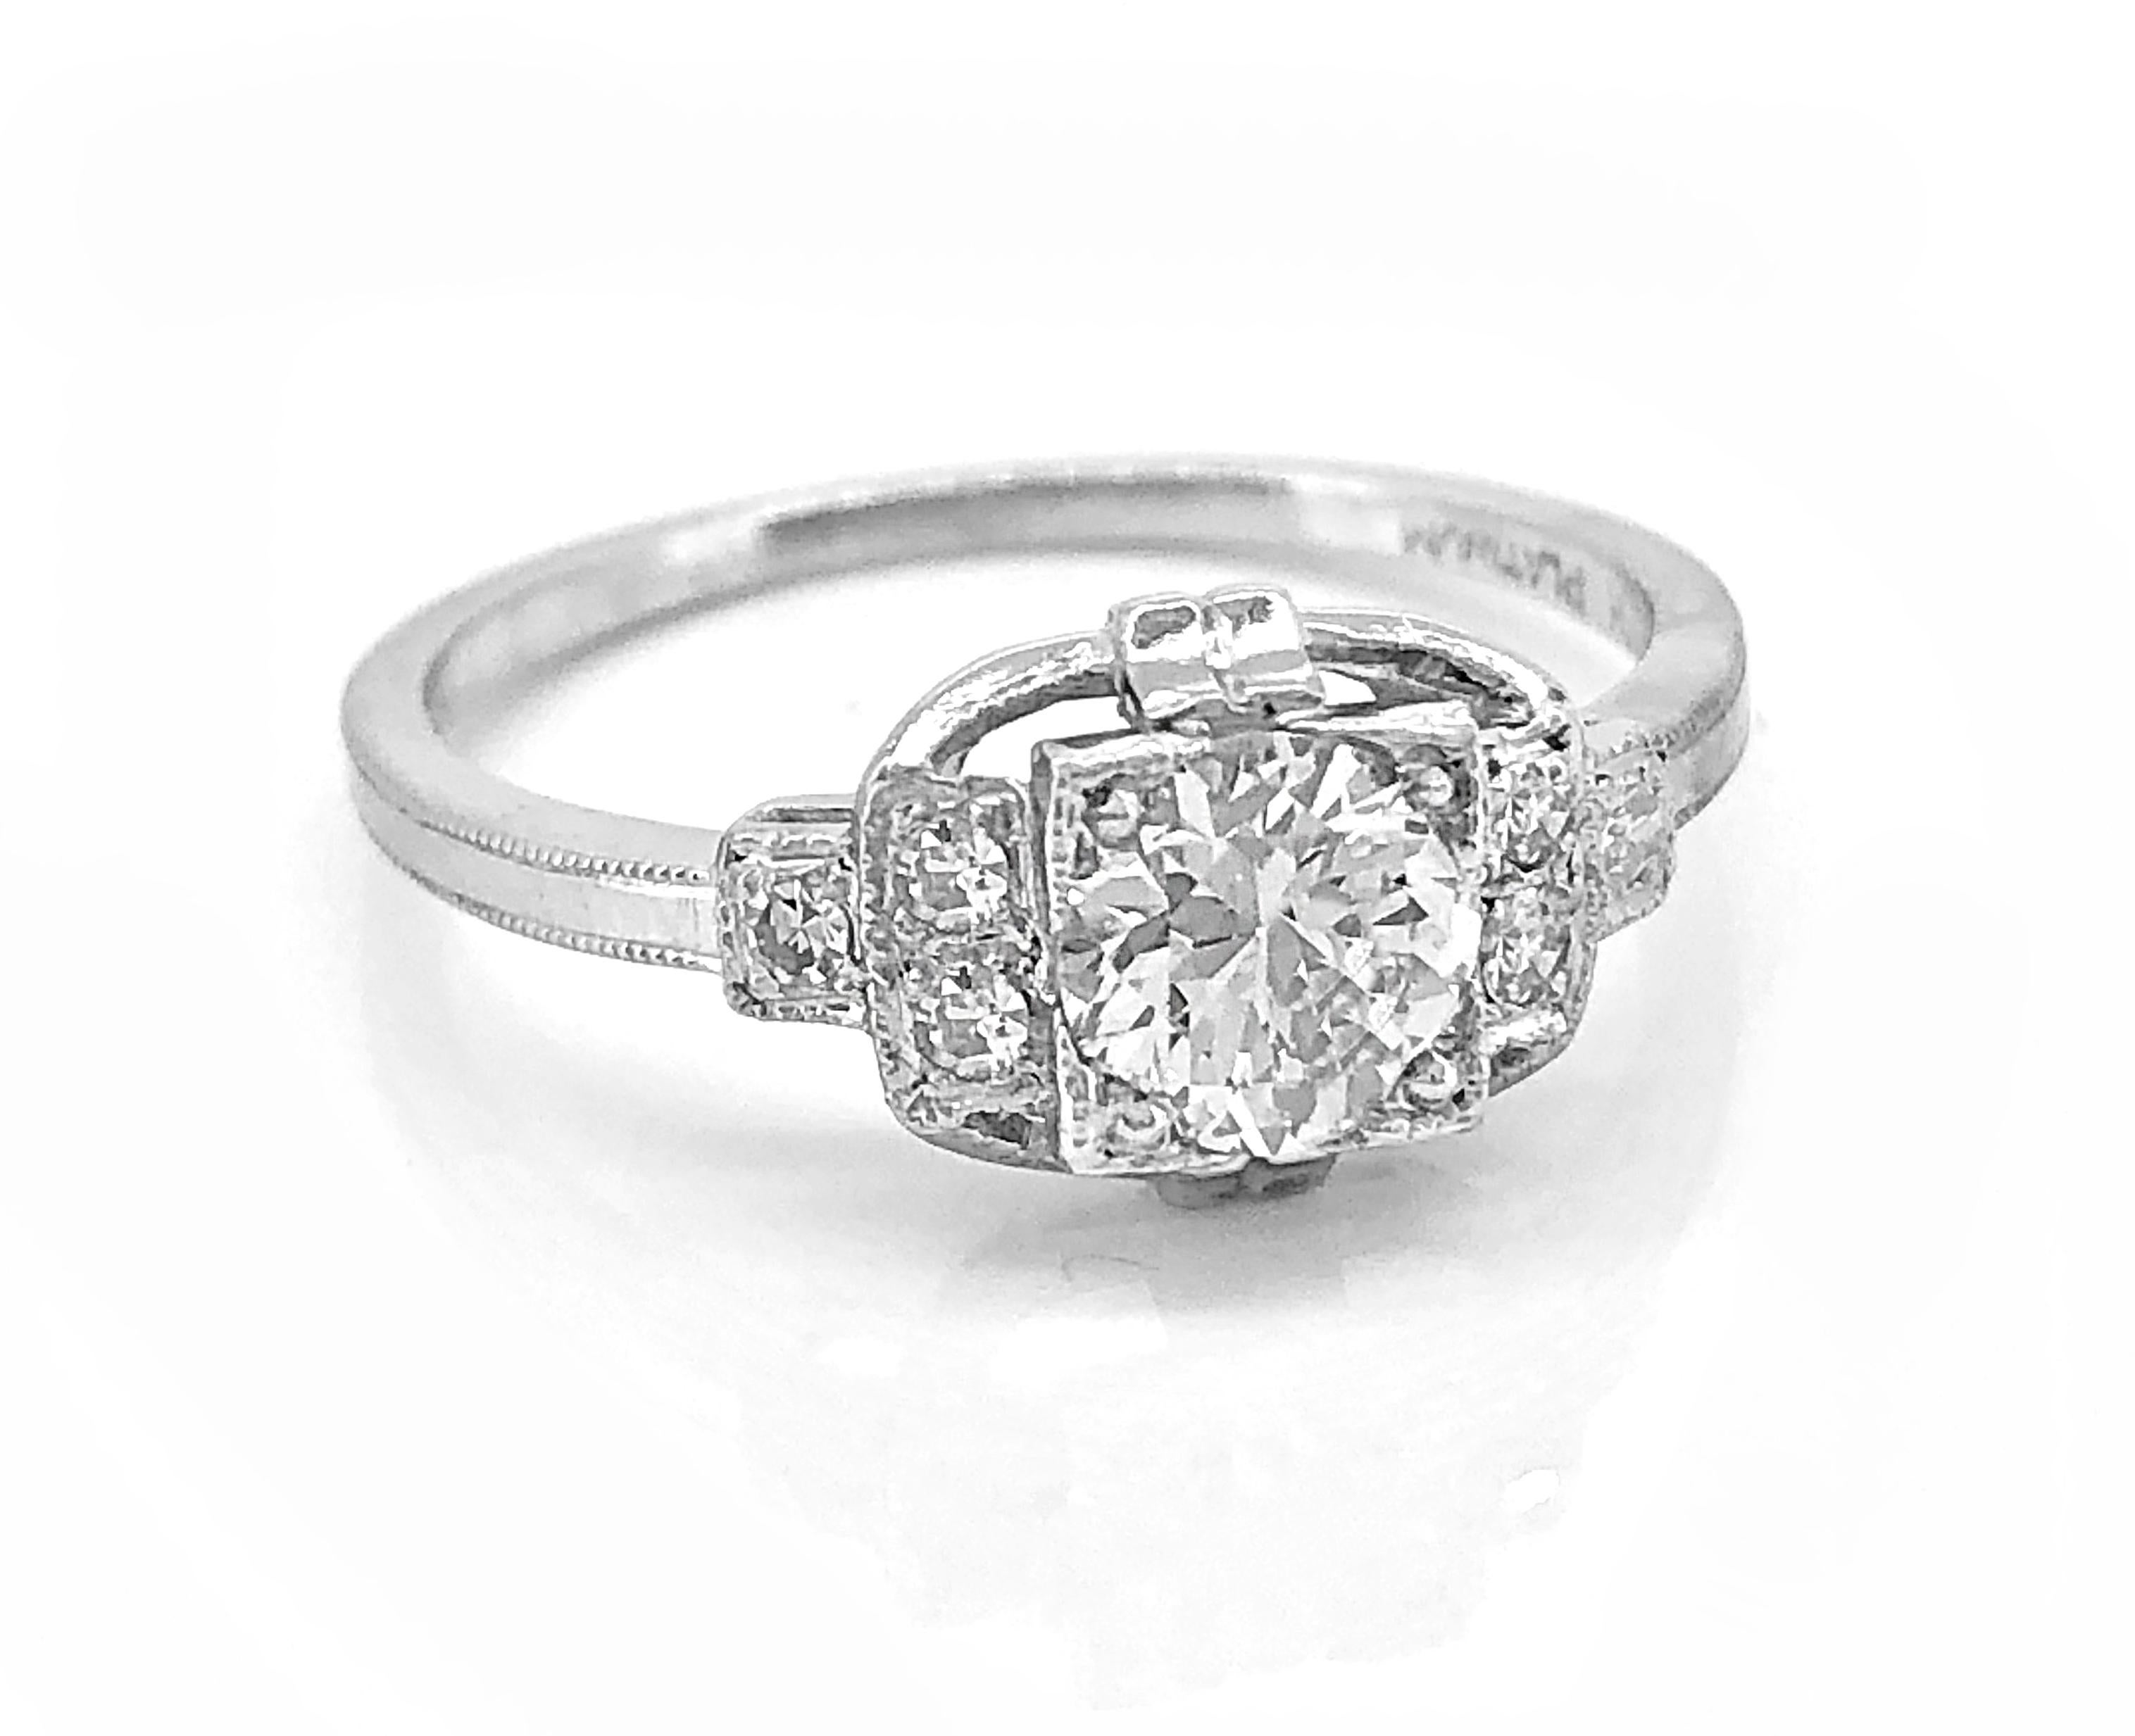 A step-down designed Art Deco diamond Antique engagement ring features a .55ct. apx. transitional cut diamond with VS2 clarity and G color. The single cut diamond melee weighs .06ct. apx. T.W. and has VS1-VS2 clarity and G-H color. This ring is